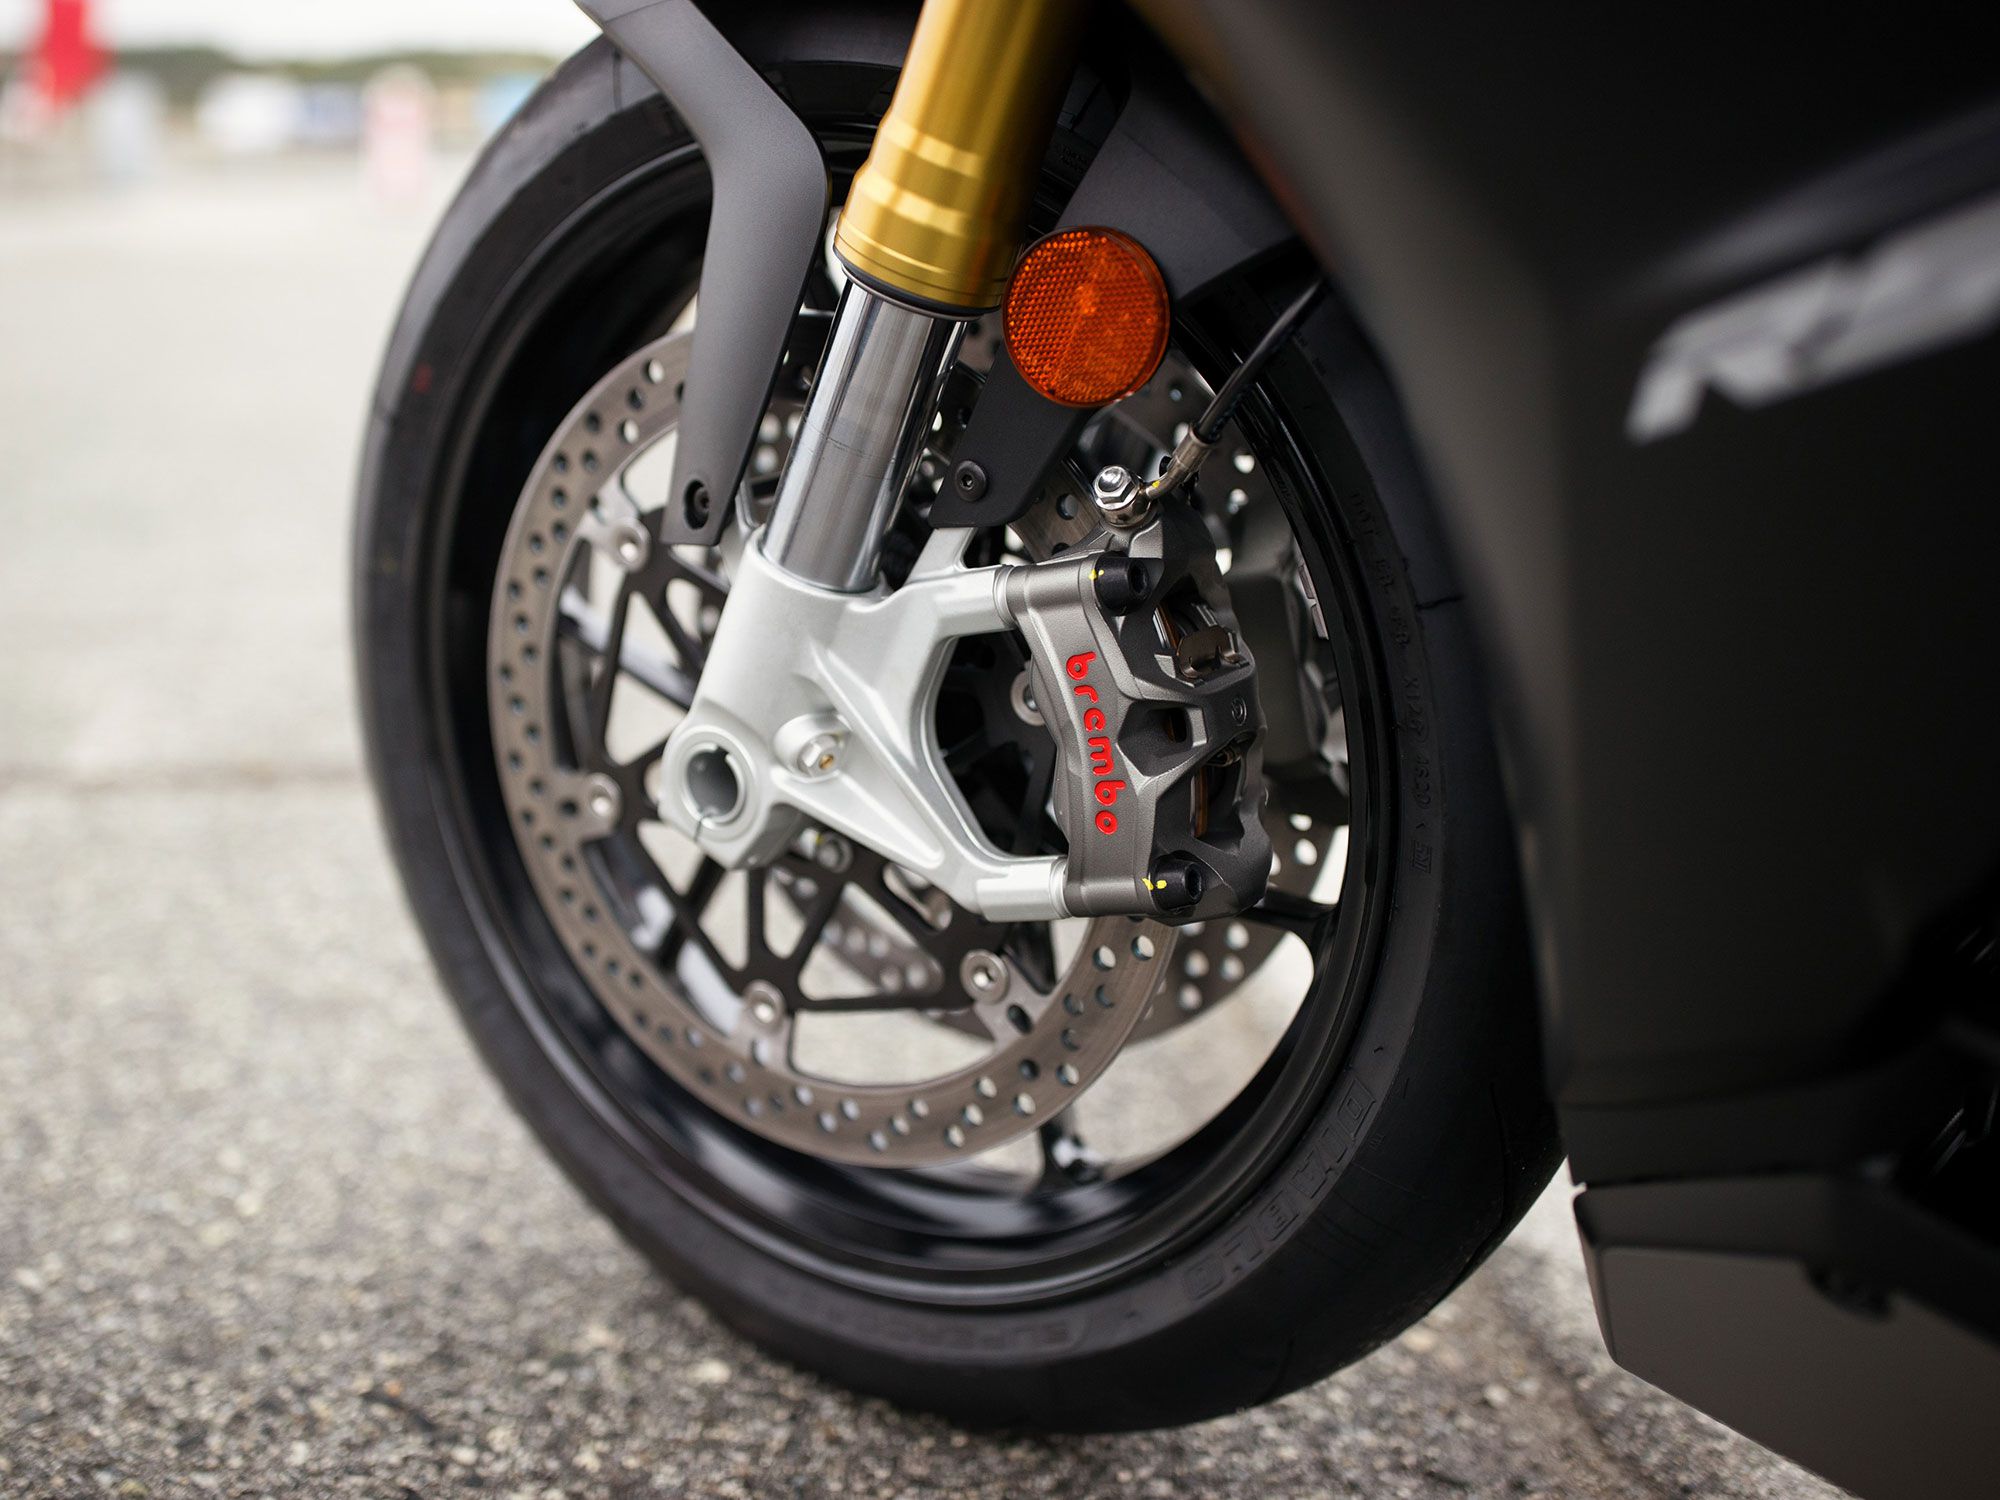 As usual, the RSV4 benefits from grade-A braking hardware that’s extremely effective at shedding speed.